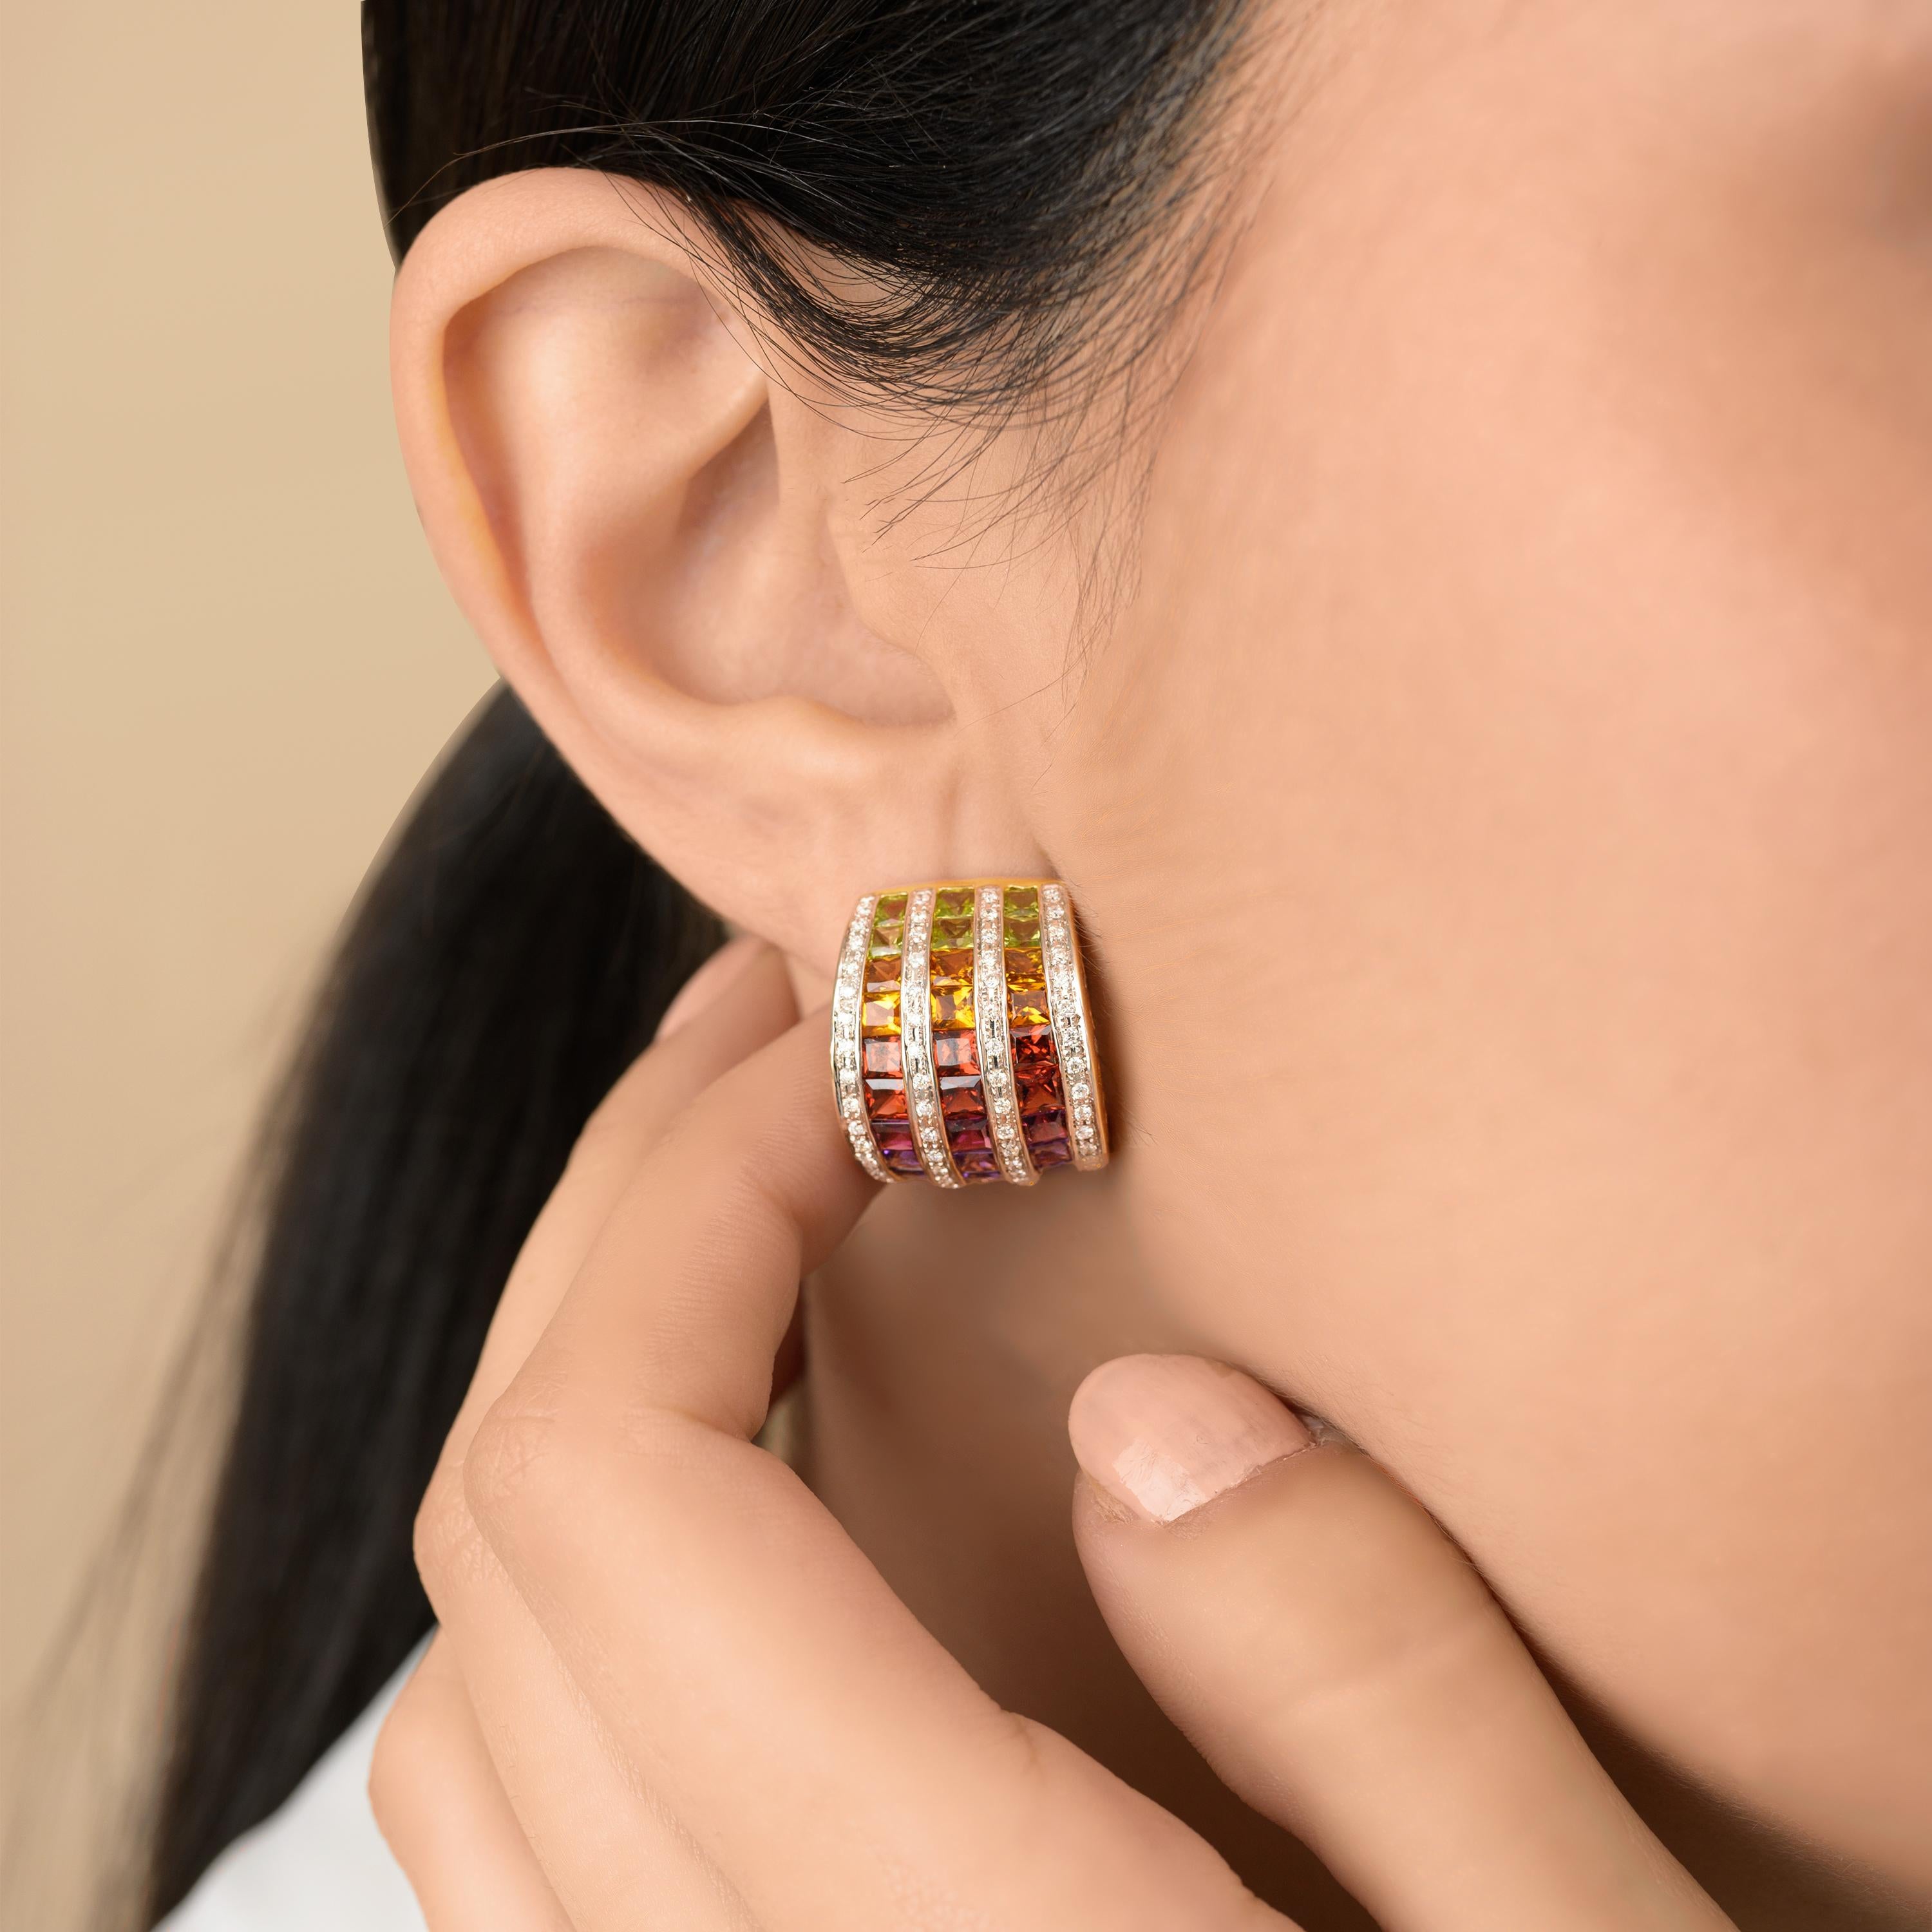 14 karat yellow gold multicolour rainbow stack diamond cocktail stud earrings

Our Rainbow Gemstones 3-line Stud Earrings is a harmonious fusion of color and brilliance. Crafted in elegant 14-karat gold, these stud earrings feature three lines of